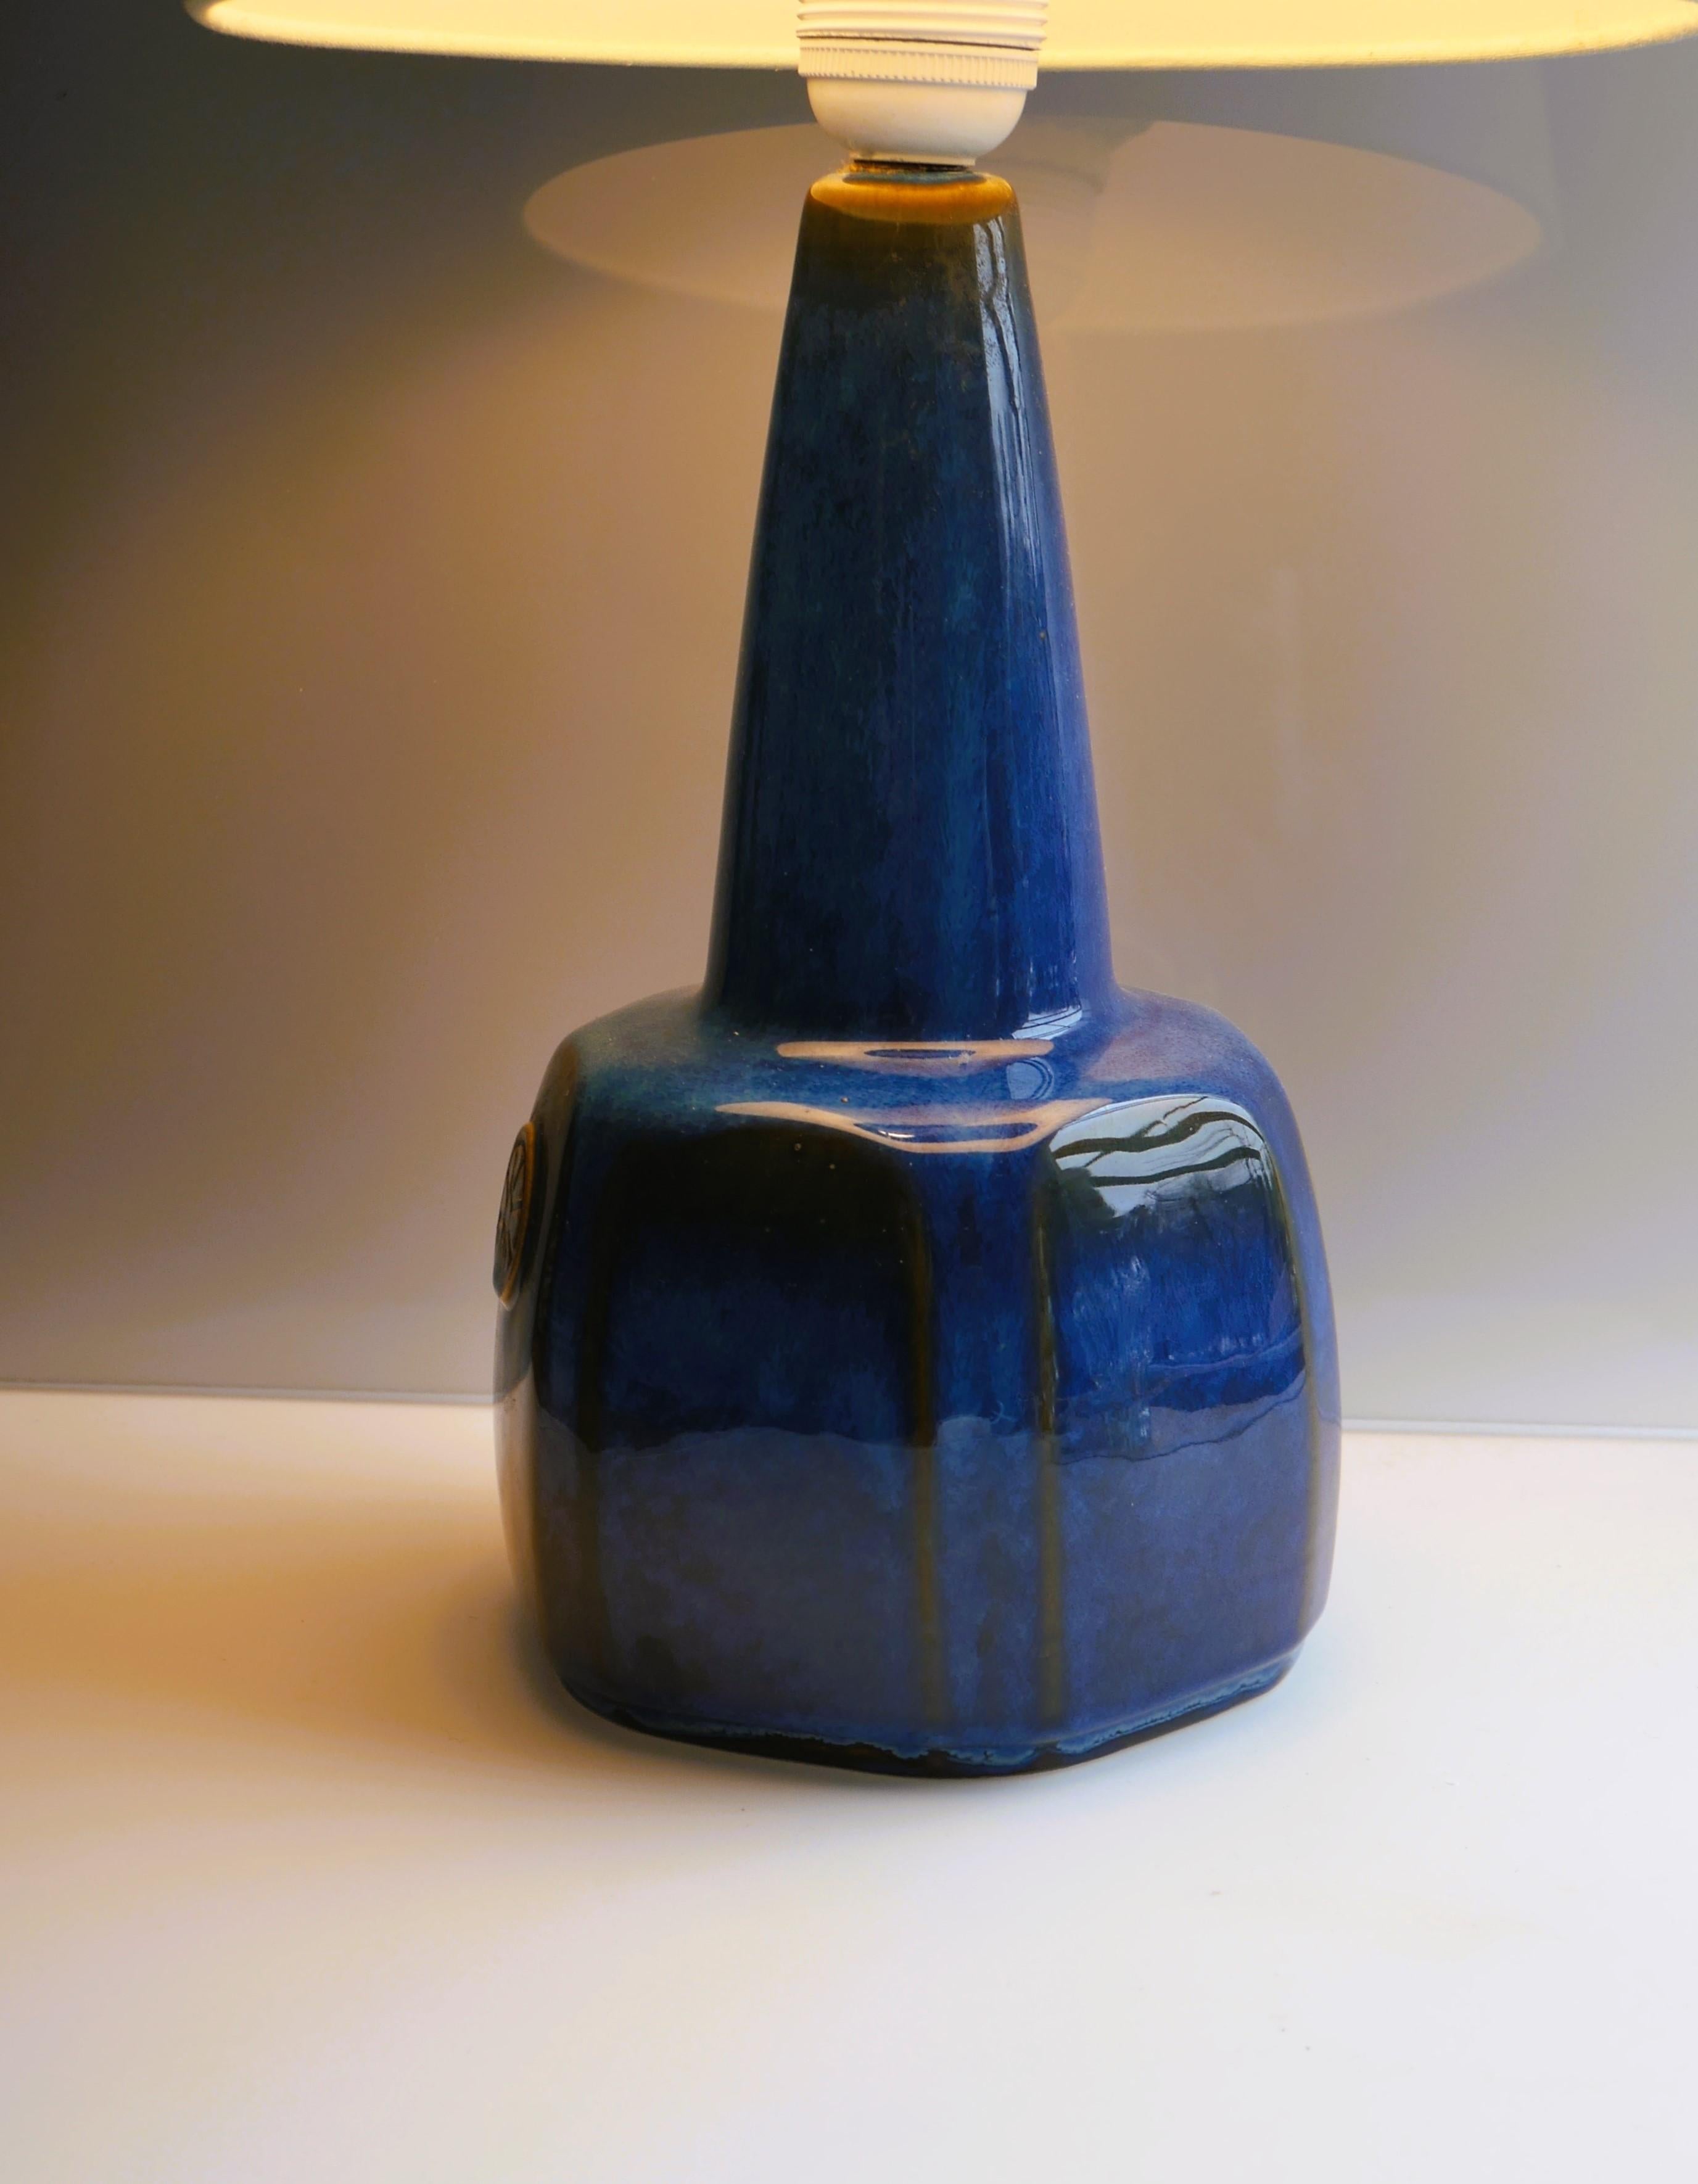 A fantastic large handmade ceramic stonewear lamp base made by Einar Johansen for Söholm, Denmark. This lamp is a classic and timeless lamp made by the talented Johansen, it has a dark blue colour with various nuances of blue and hints of green in